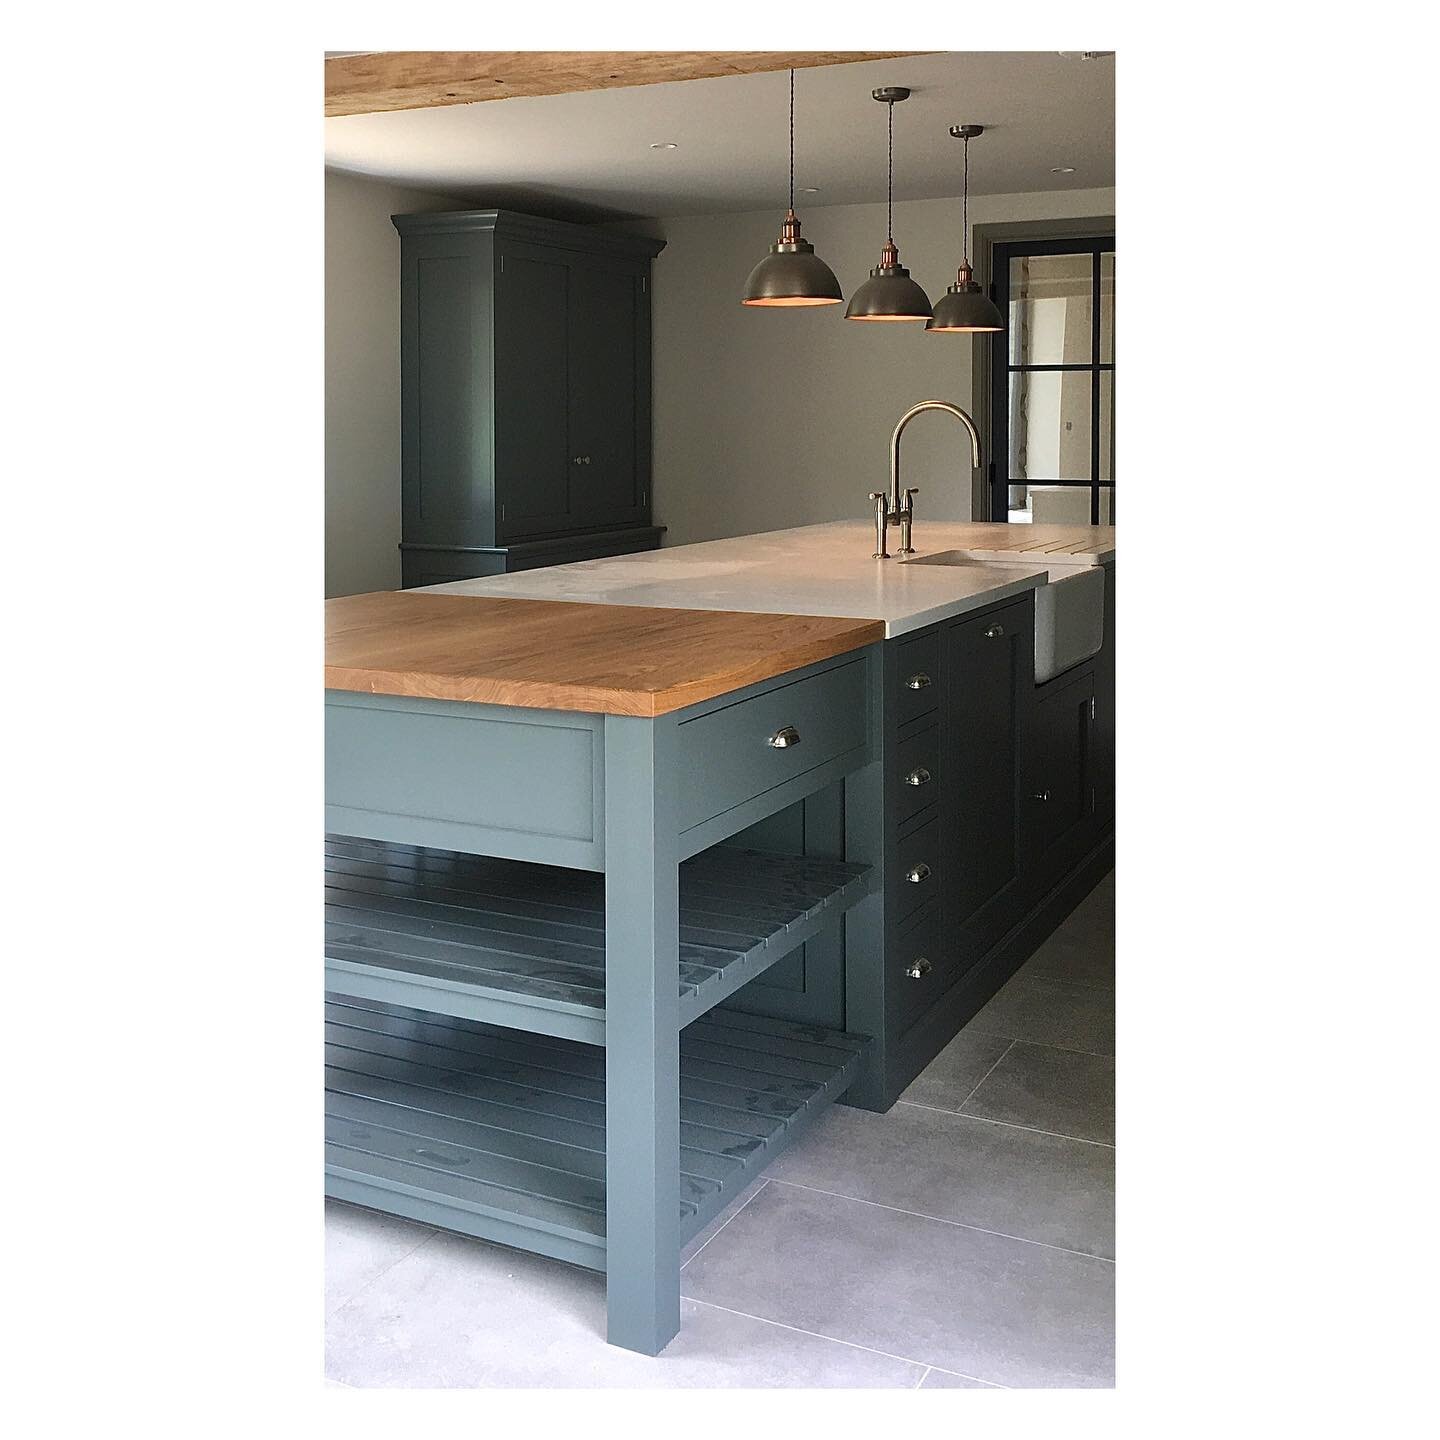 Another little image from our Old Watermill project in Oxfordshire.. such a lovely space and clients..
.
.
.
.
#bespokekitchen #handpaintedkitchen #oldbeams #periodhome #oxfordshire #perrinandrowe #rowenandwren #kitchenisland #interiordesign